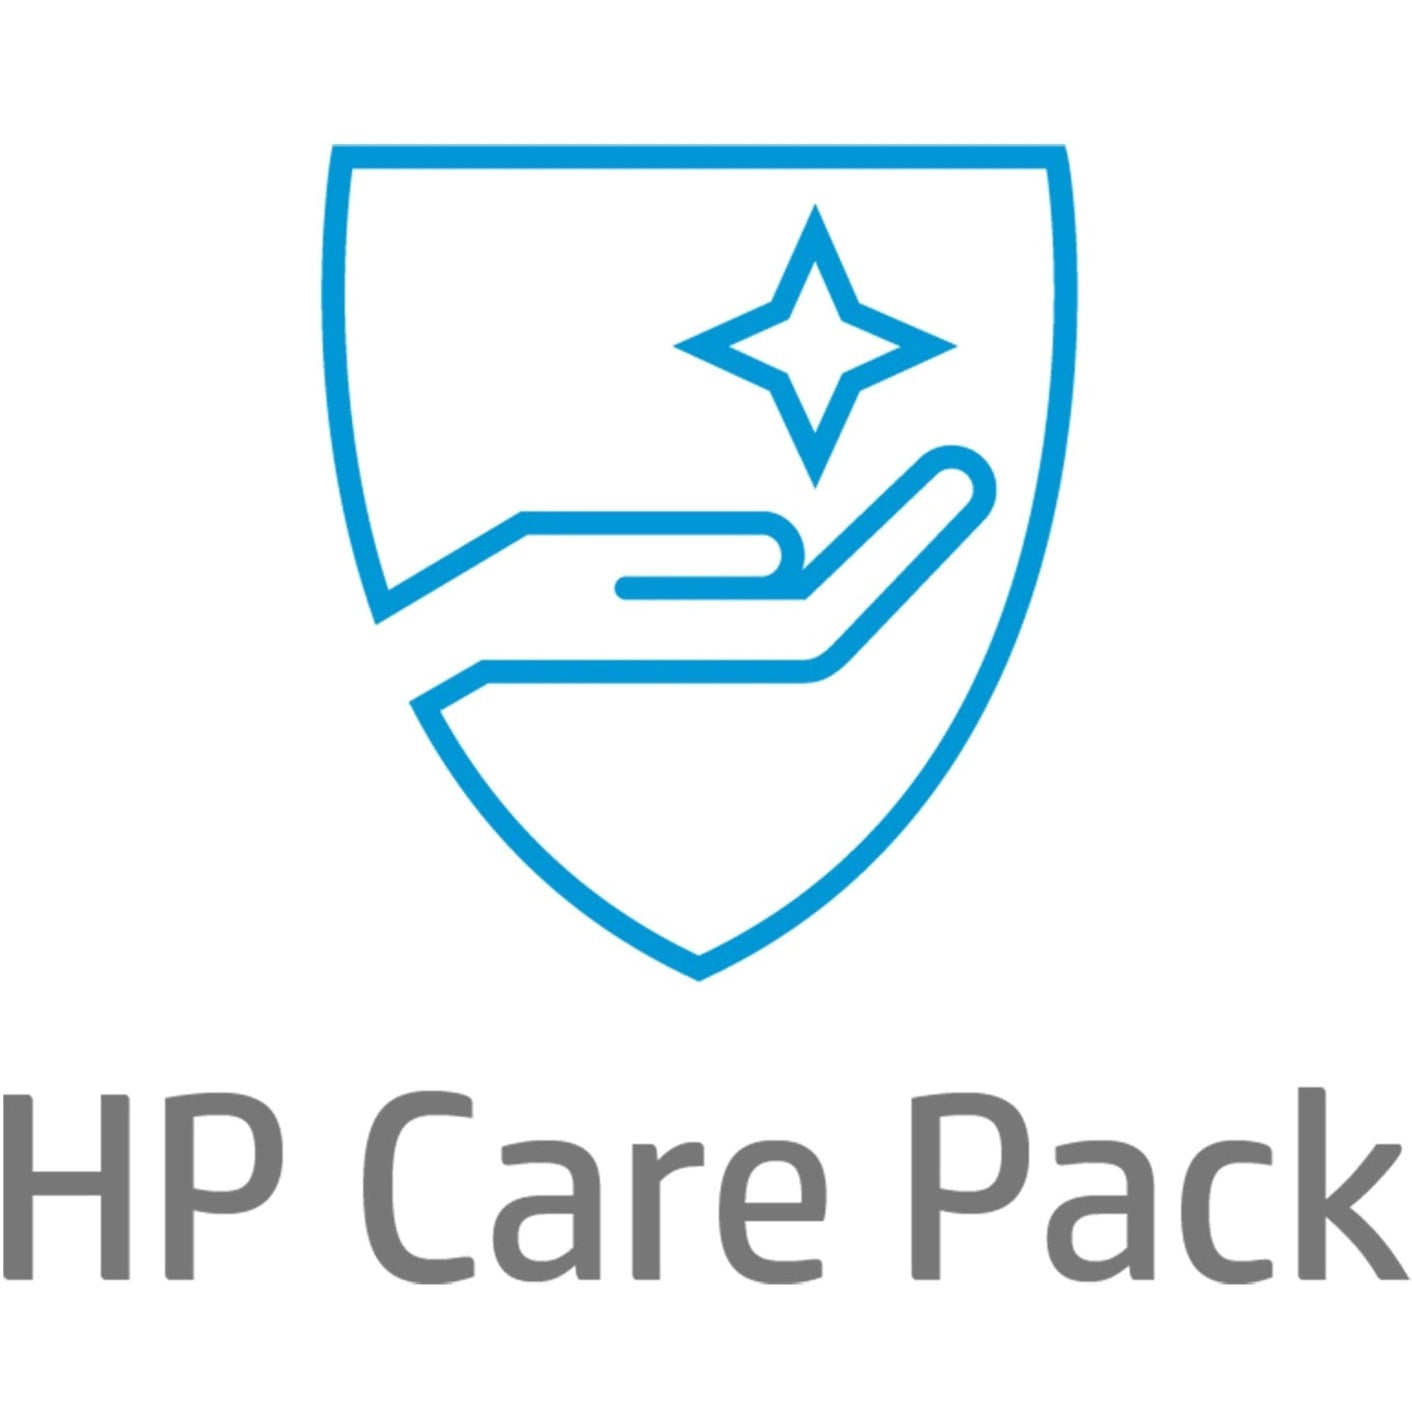 HP Care Pack Hardware Support - Extended Service - 1 Year - Service (UA6Y9E)